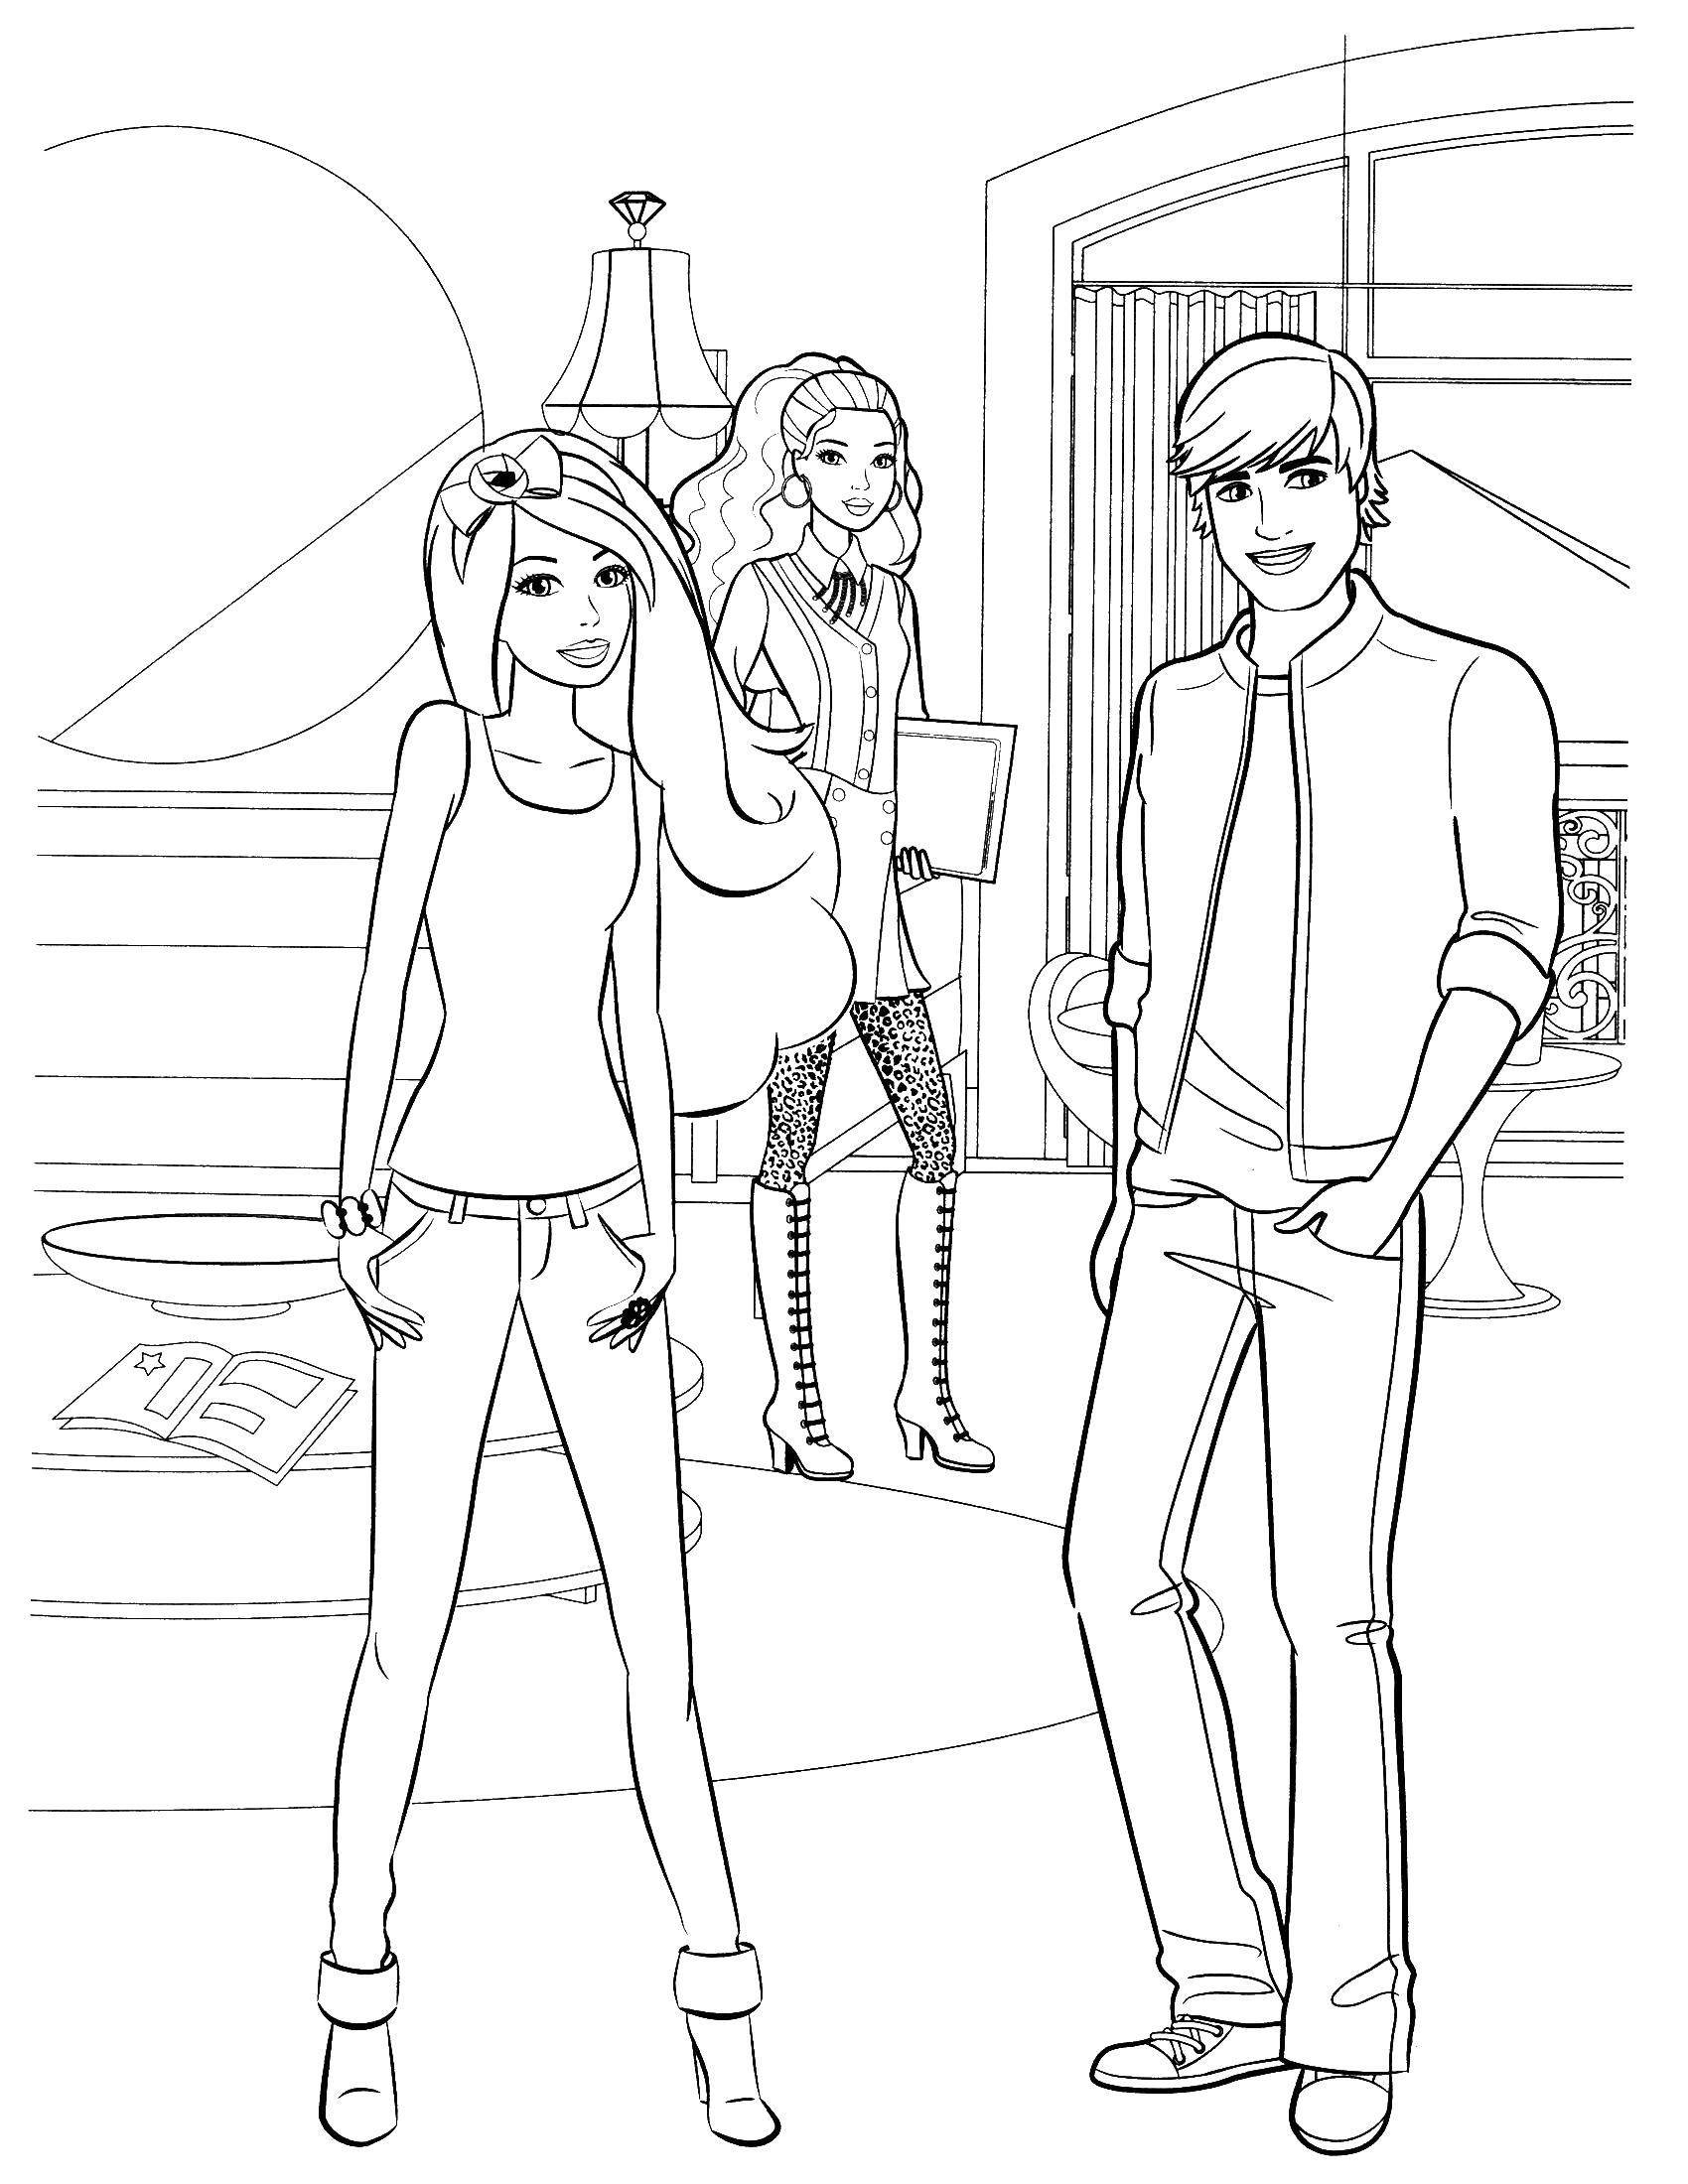 Coloring Barbie and her friends. Category Barbie . Tags:  Barbie , model, Druzba.